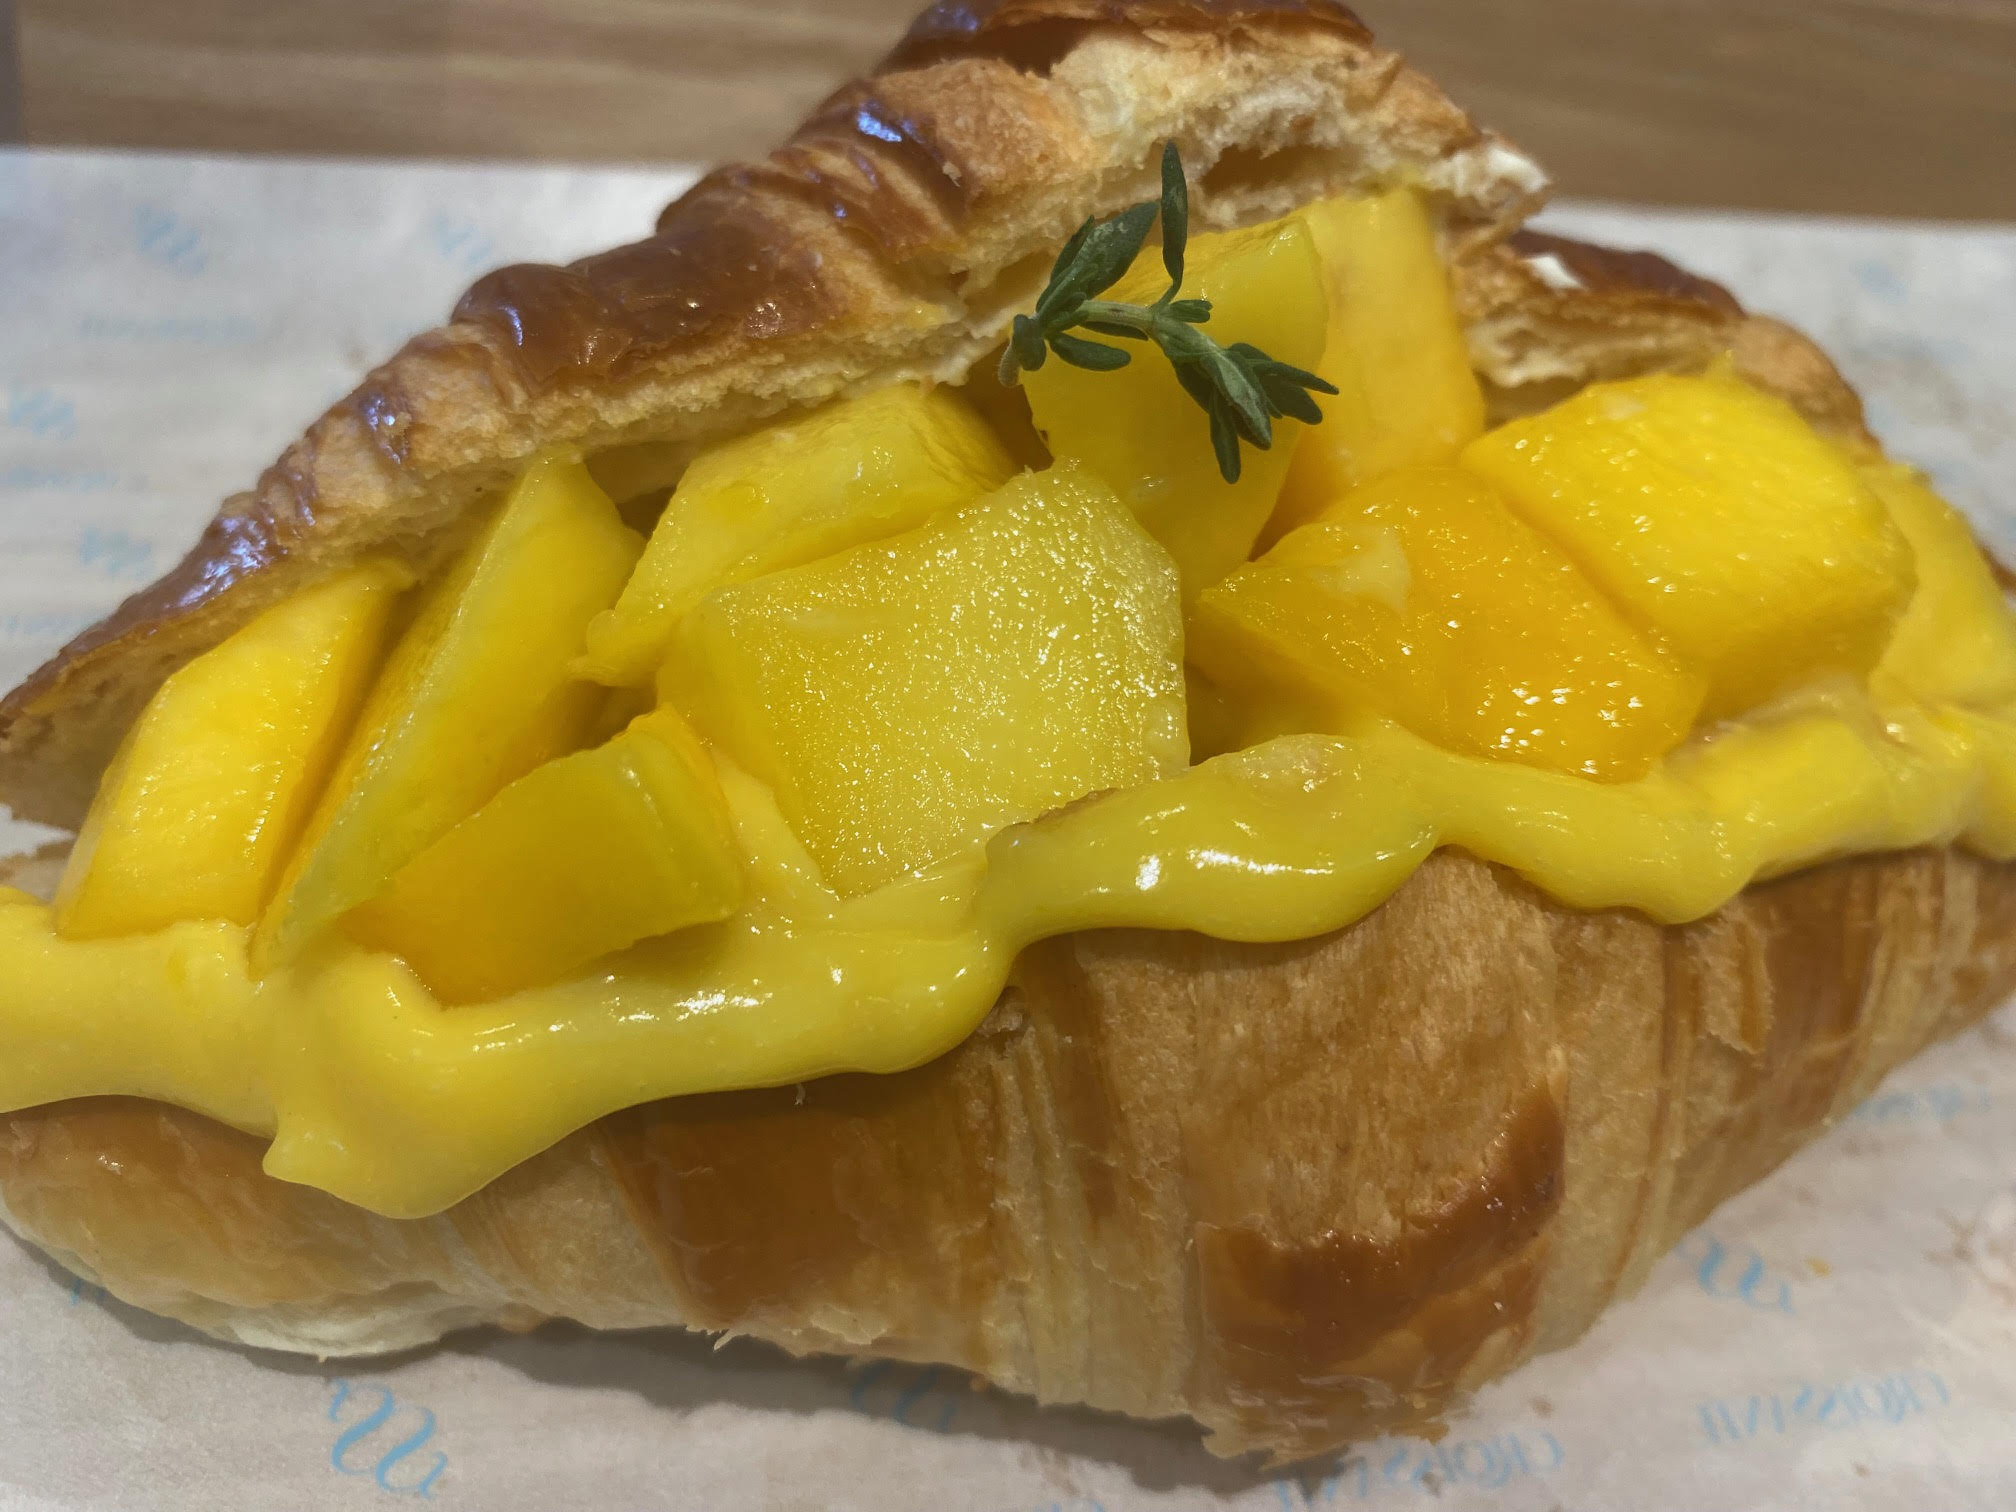 The Croissante bakery-cafe in Santa Clara turns croissants into full desserts. The Mango Croissant is filled with cream and topped with fresh mango and mango puree. (Linda Zavoral/Bay Area News Group)